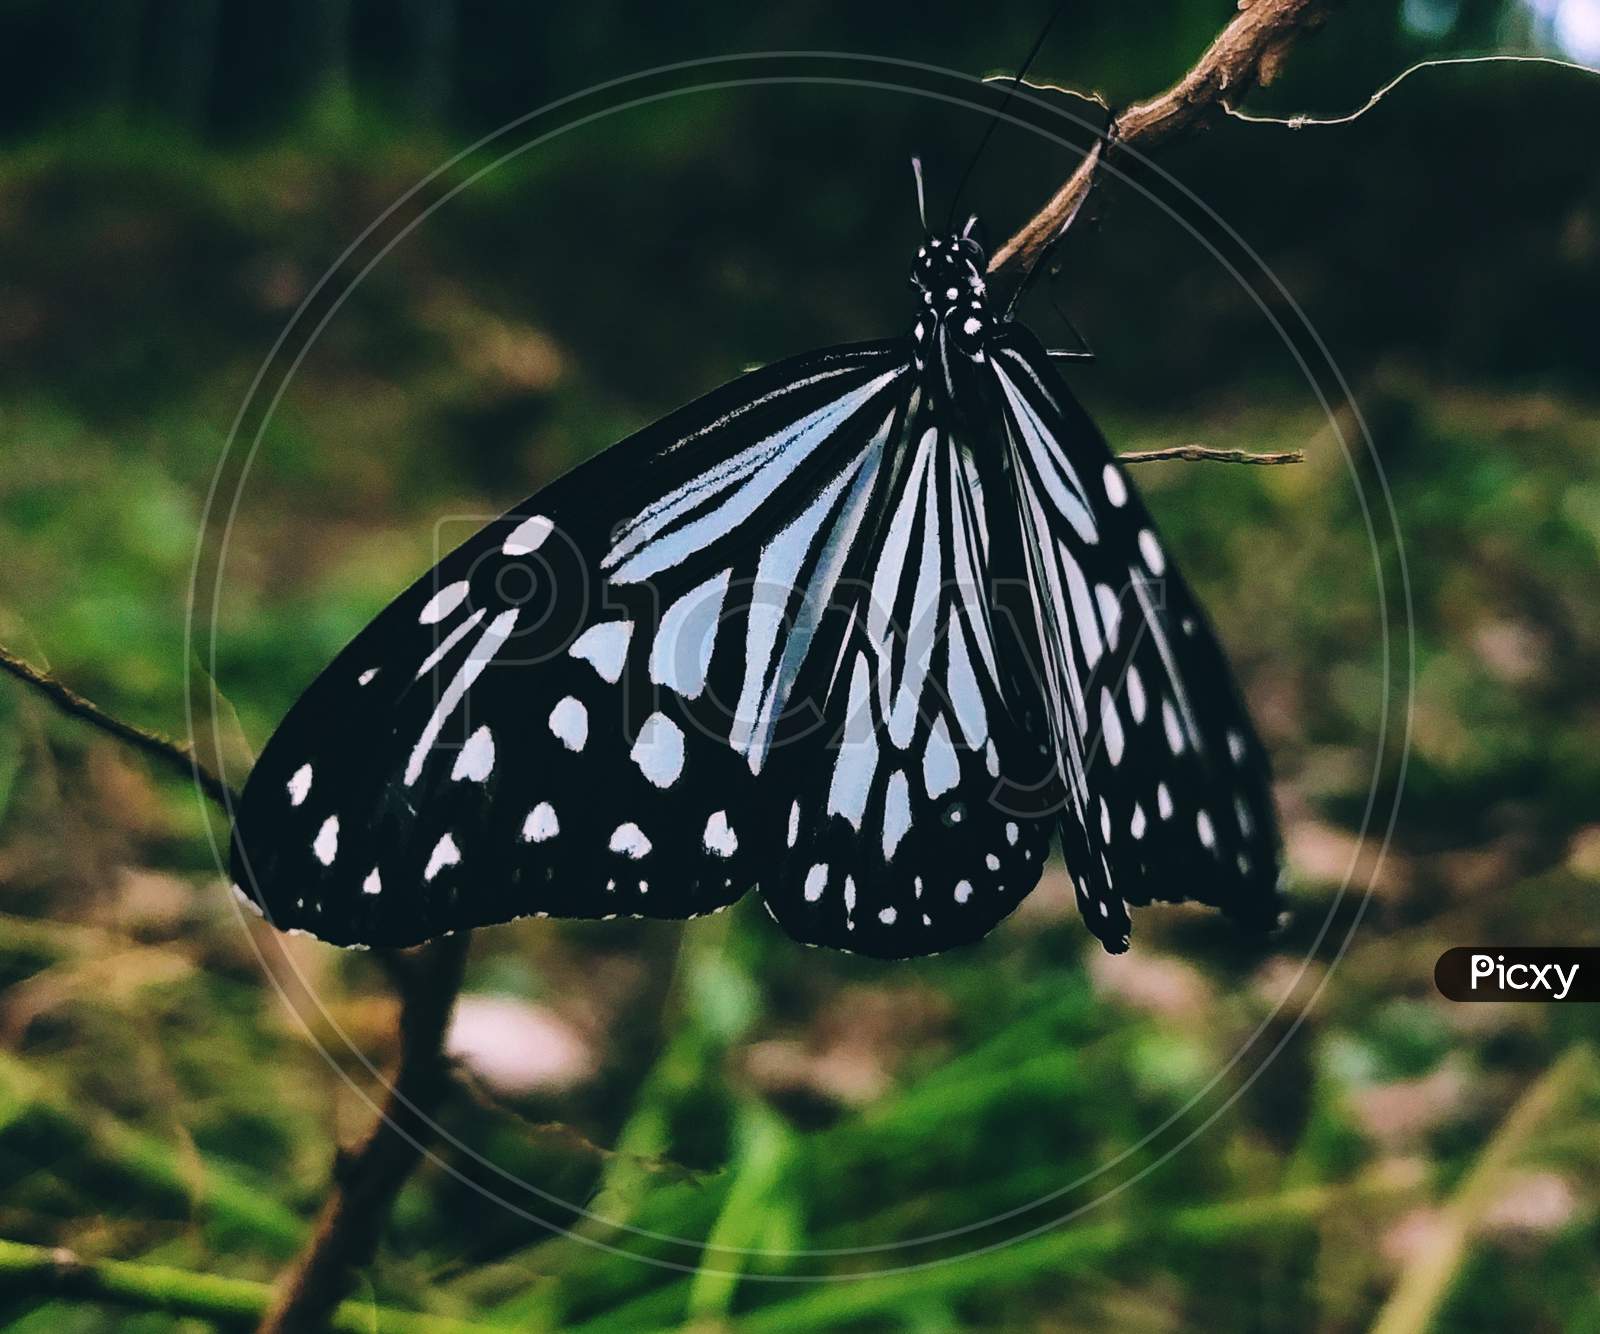 Close-up image of a black and white colored butterfly.